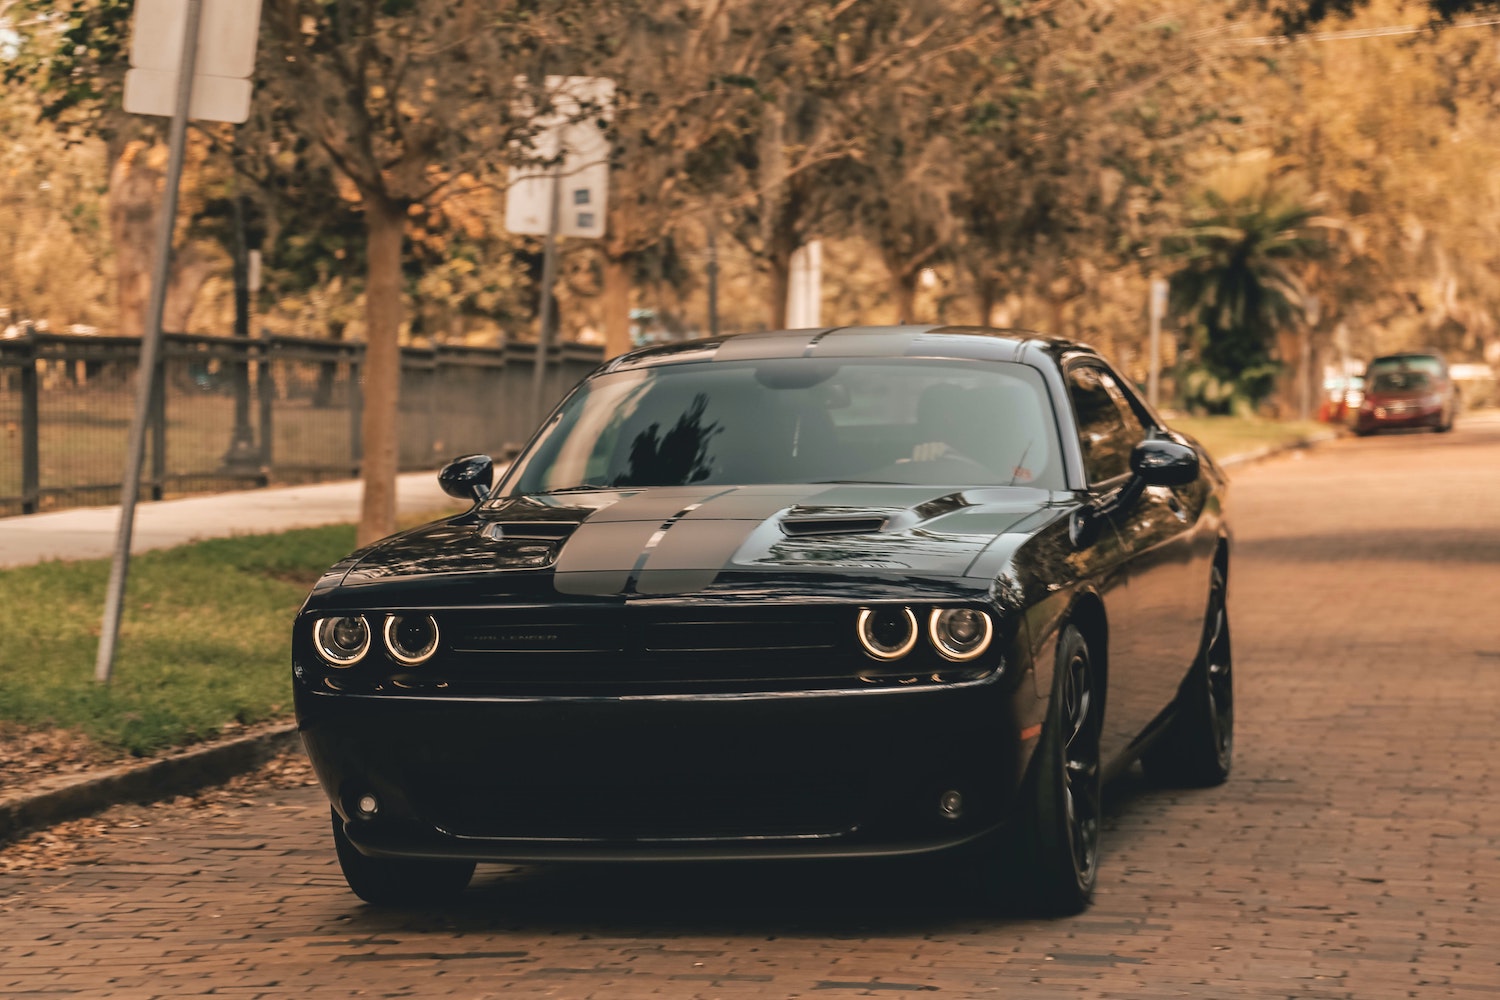 A black Dodge Challenger is parked on the street in front of a row of trees.